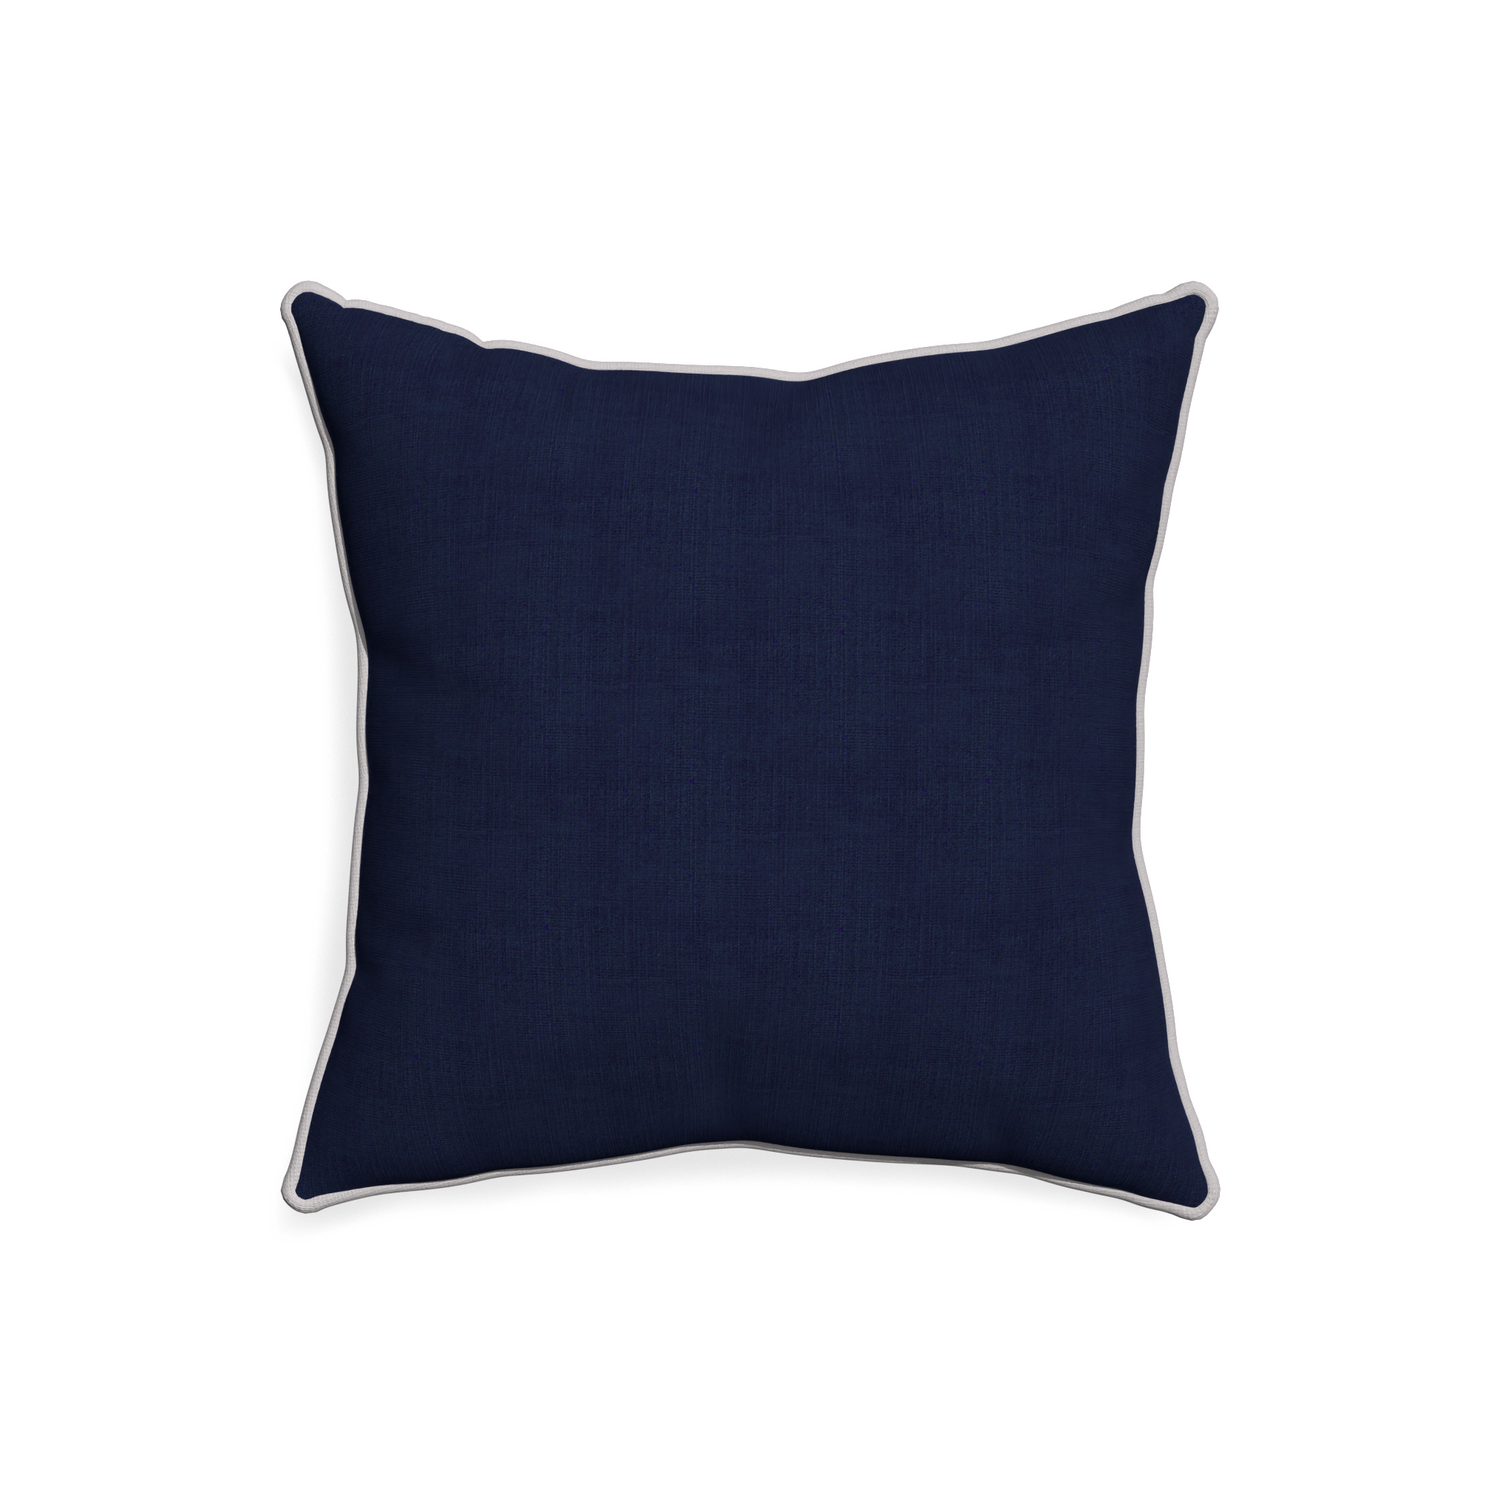 20-square midnight custom navy bluepillow with pebble piping on white background